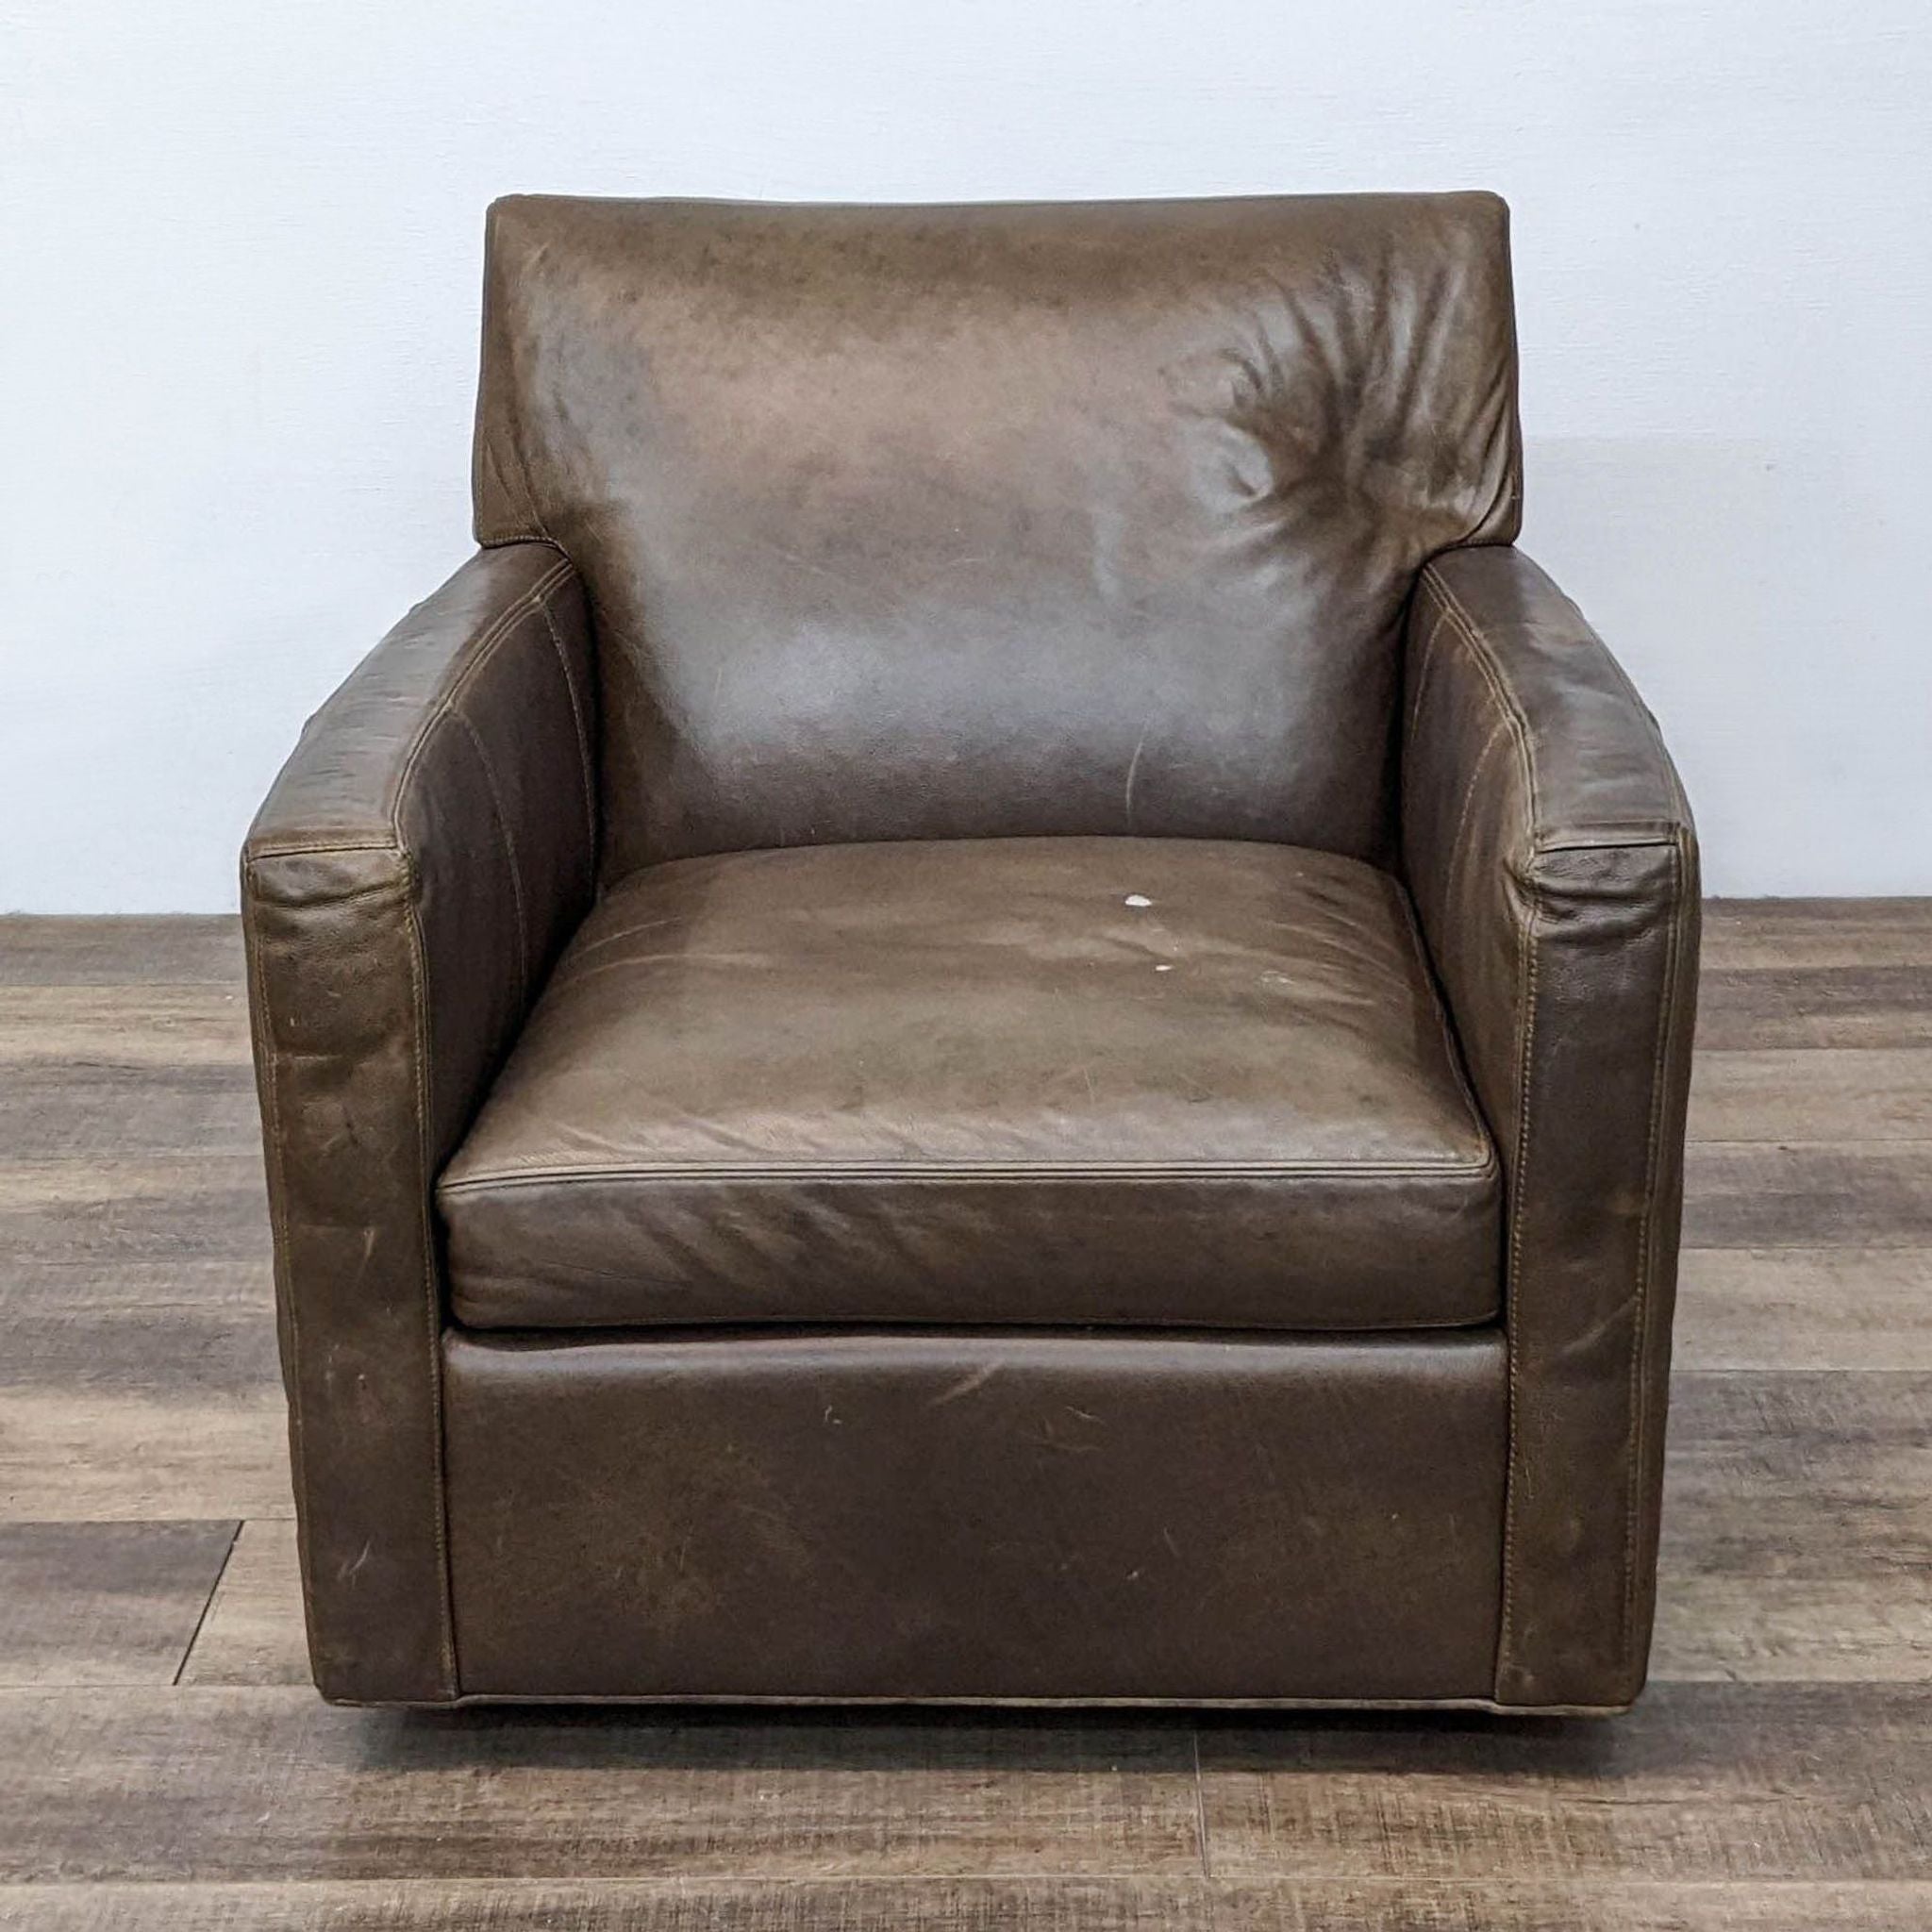 Front view of a Crate & Barrel brown leather lounge chair with visible wear on a wooden floor.